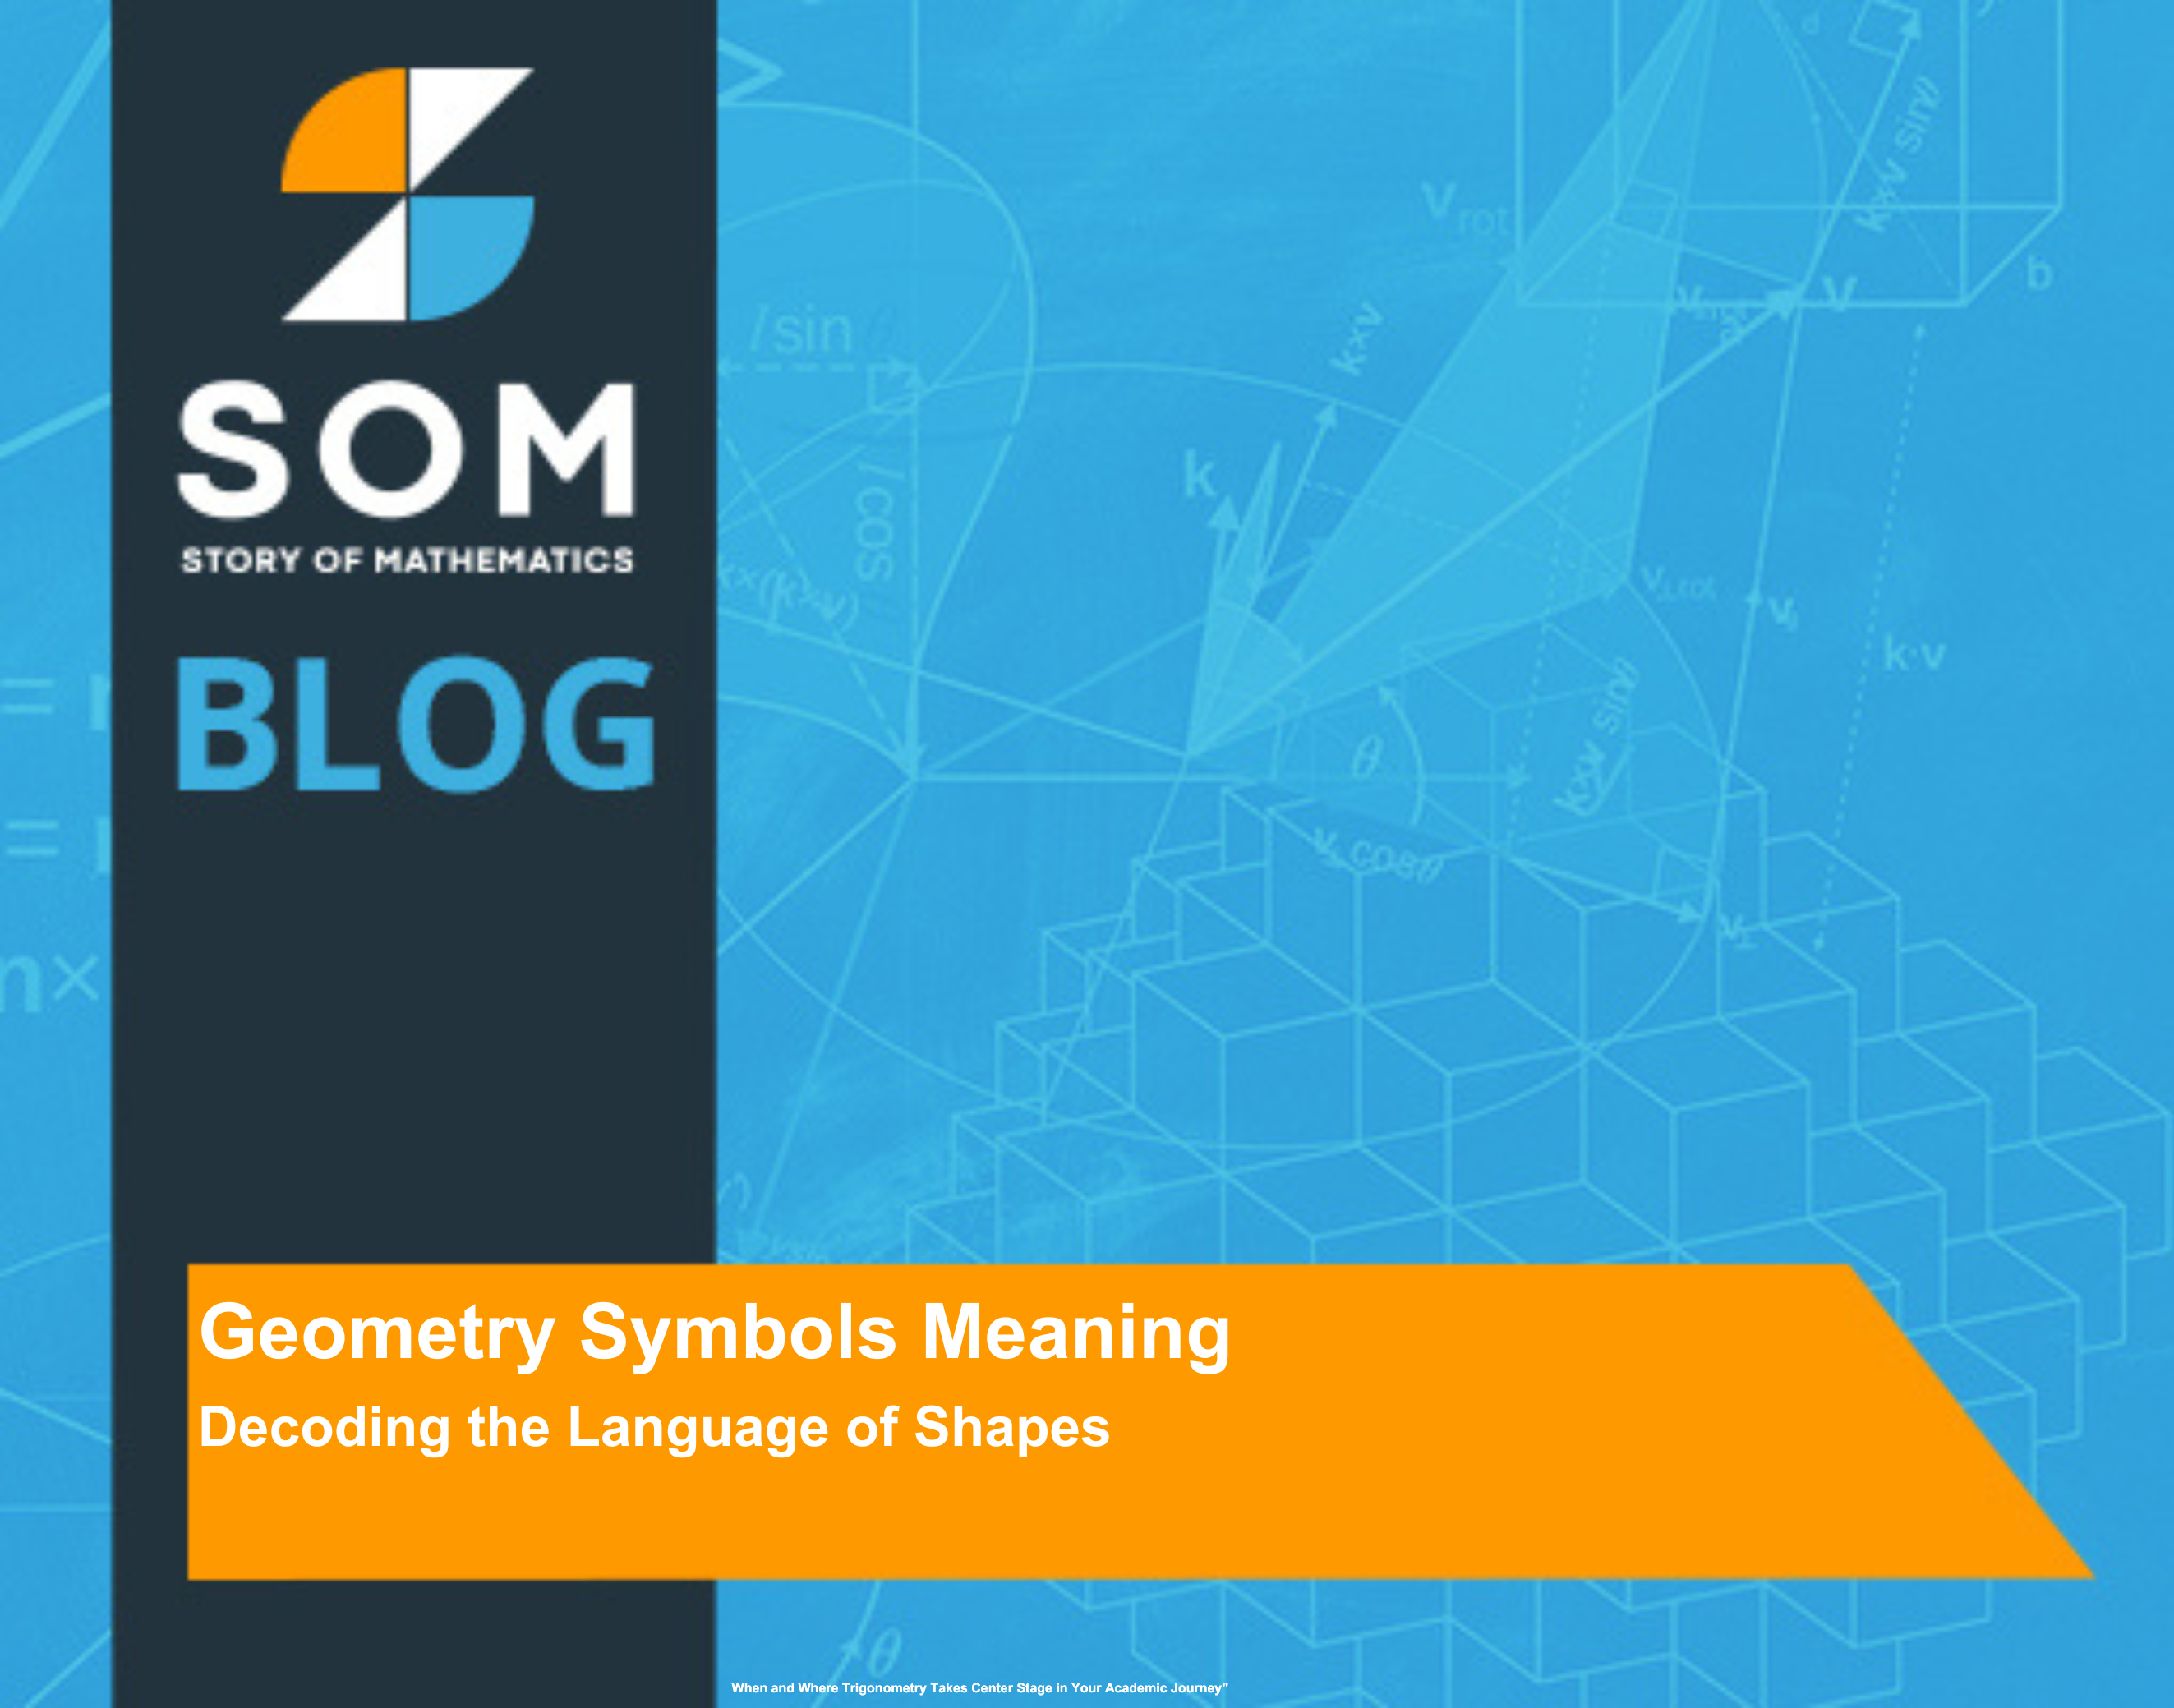 Feature Image Geometry Symbols Meaning Decoding the Language of Shapes